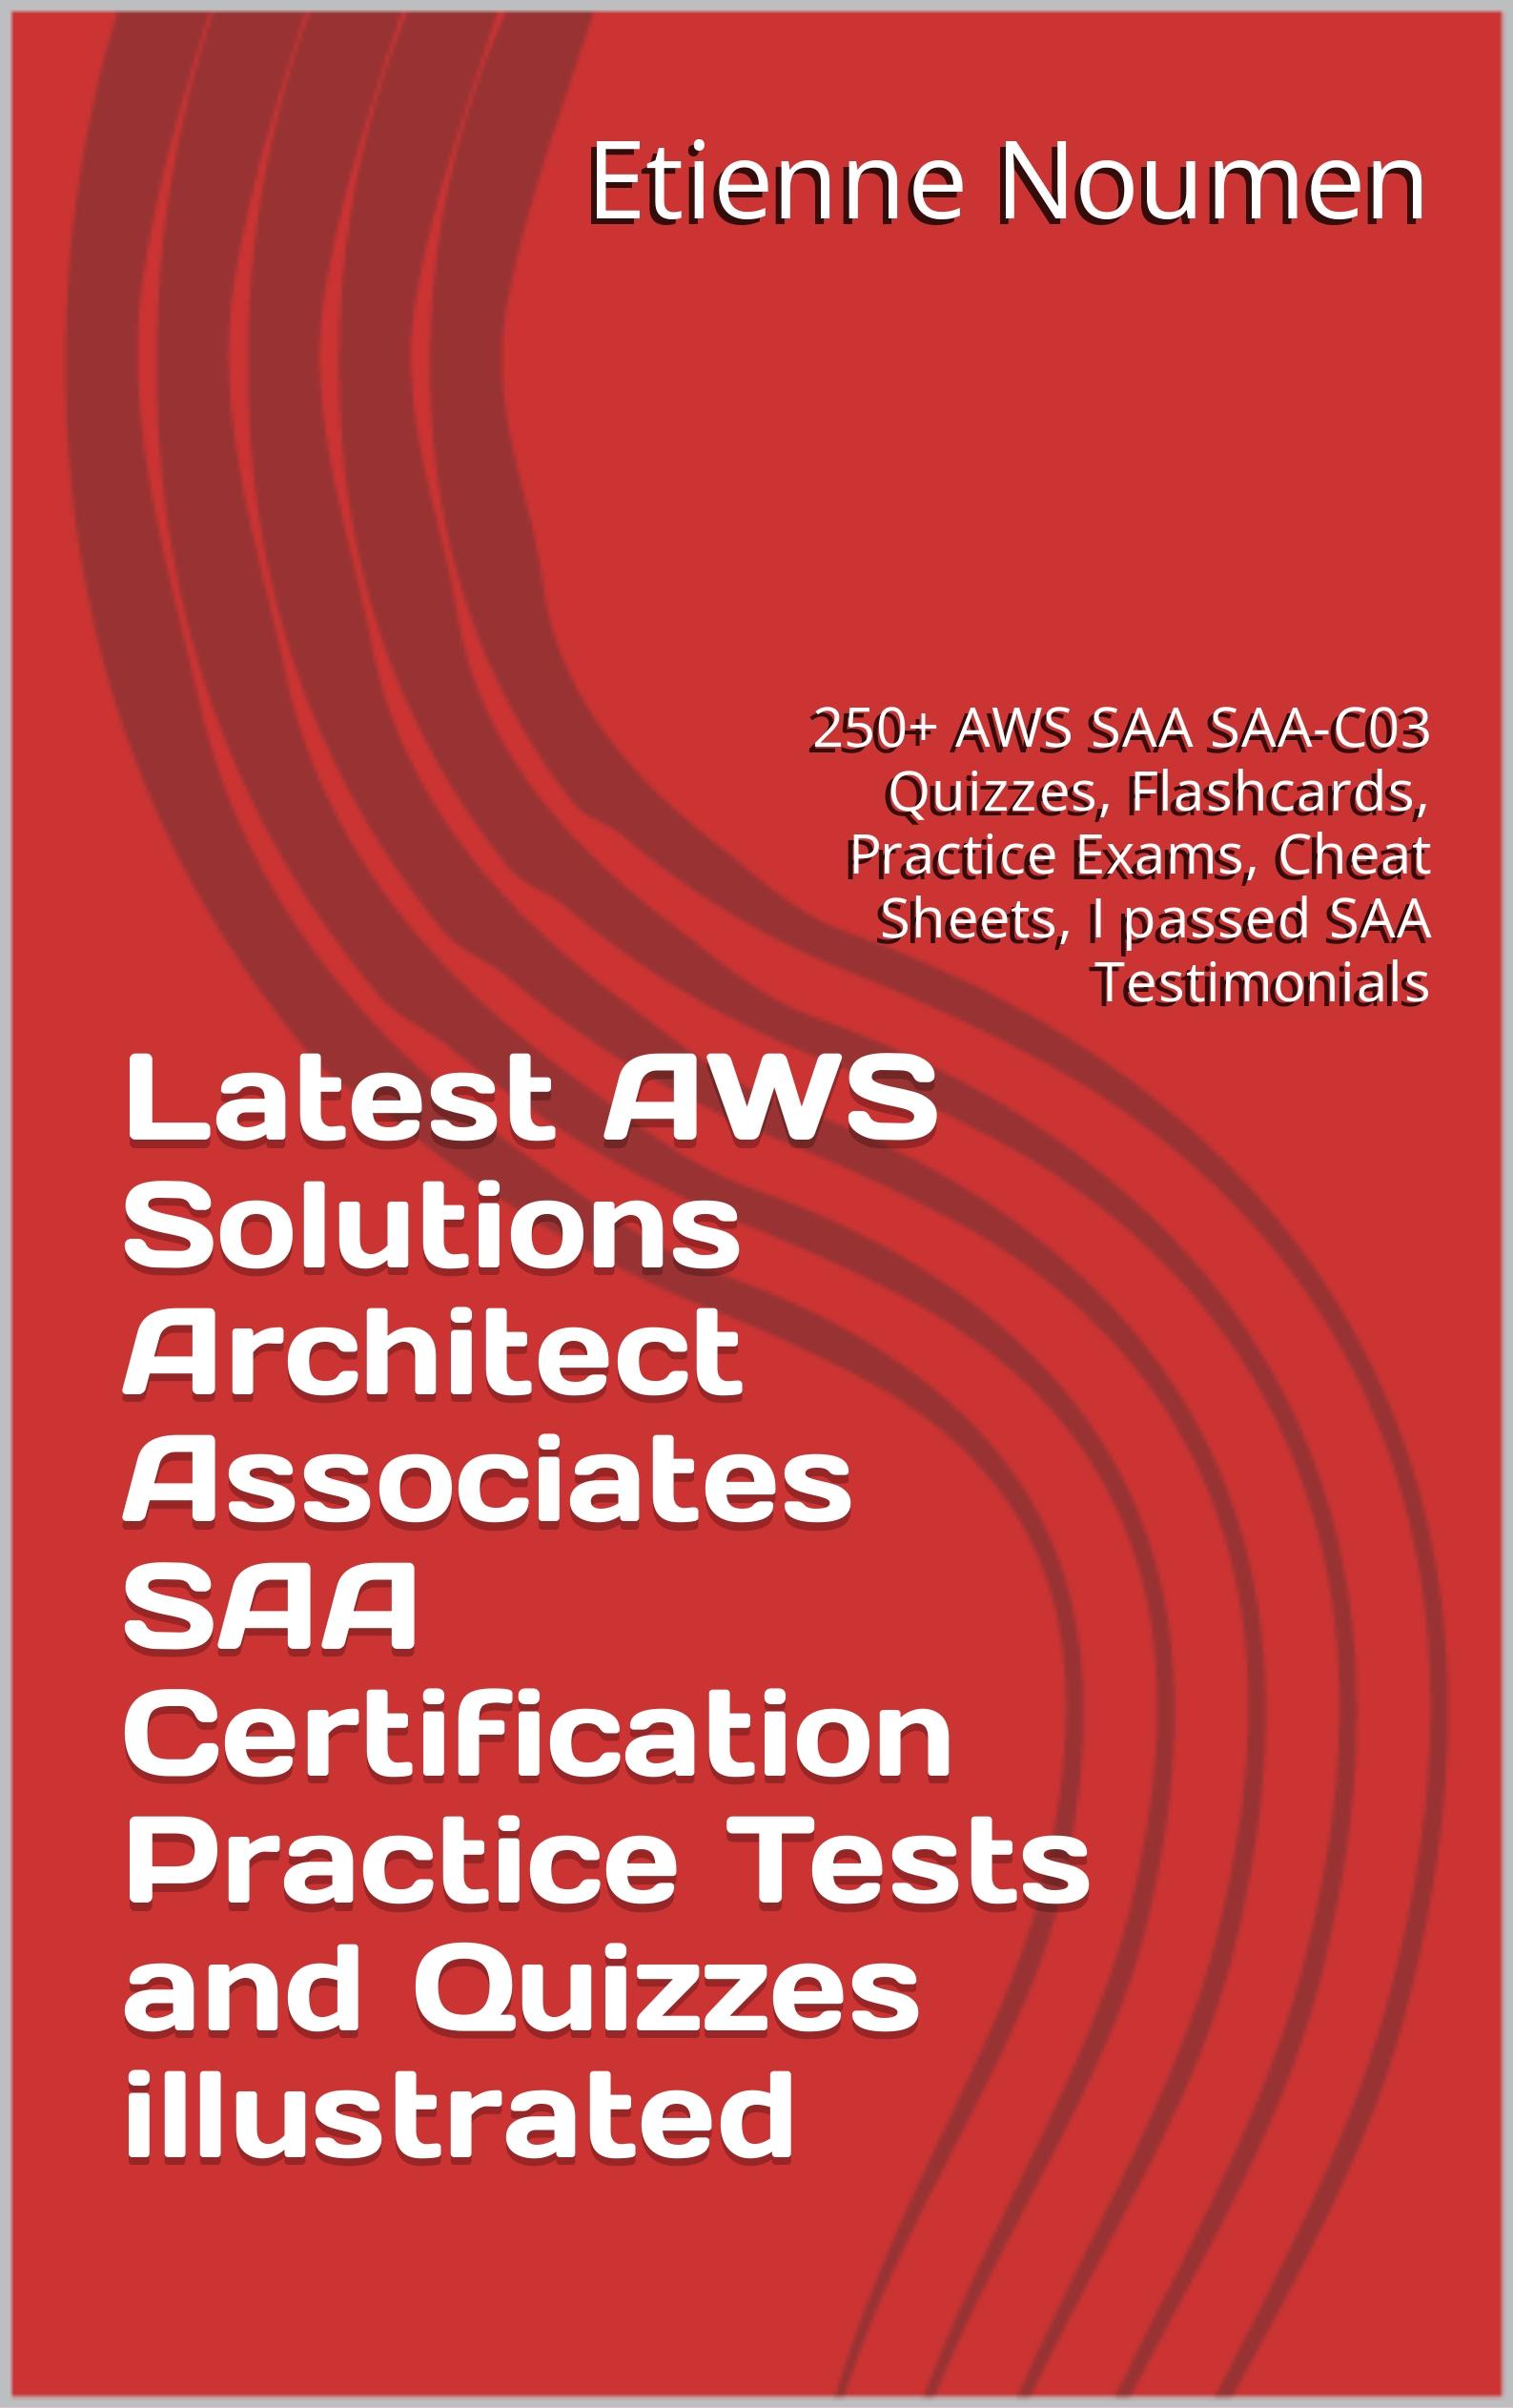 2023 AWS Solutions Architect Associates SAA Certification Practice Tests and Quizzes illustrated: 250+ AWS SAA SAA-C03 Quizzes, Practice Exams, Cheat Sheets, I passed SAA Testimonials, Tips